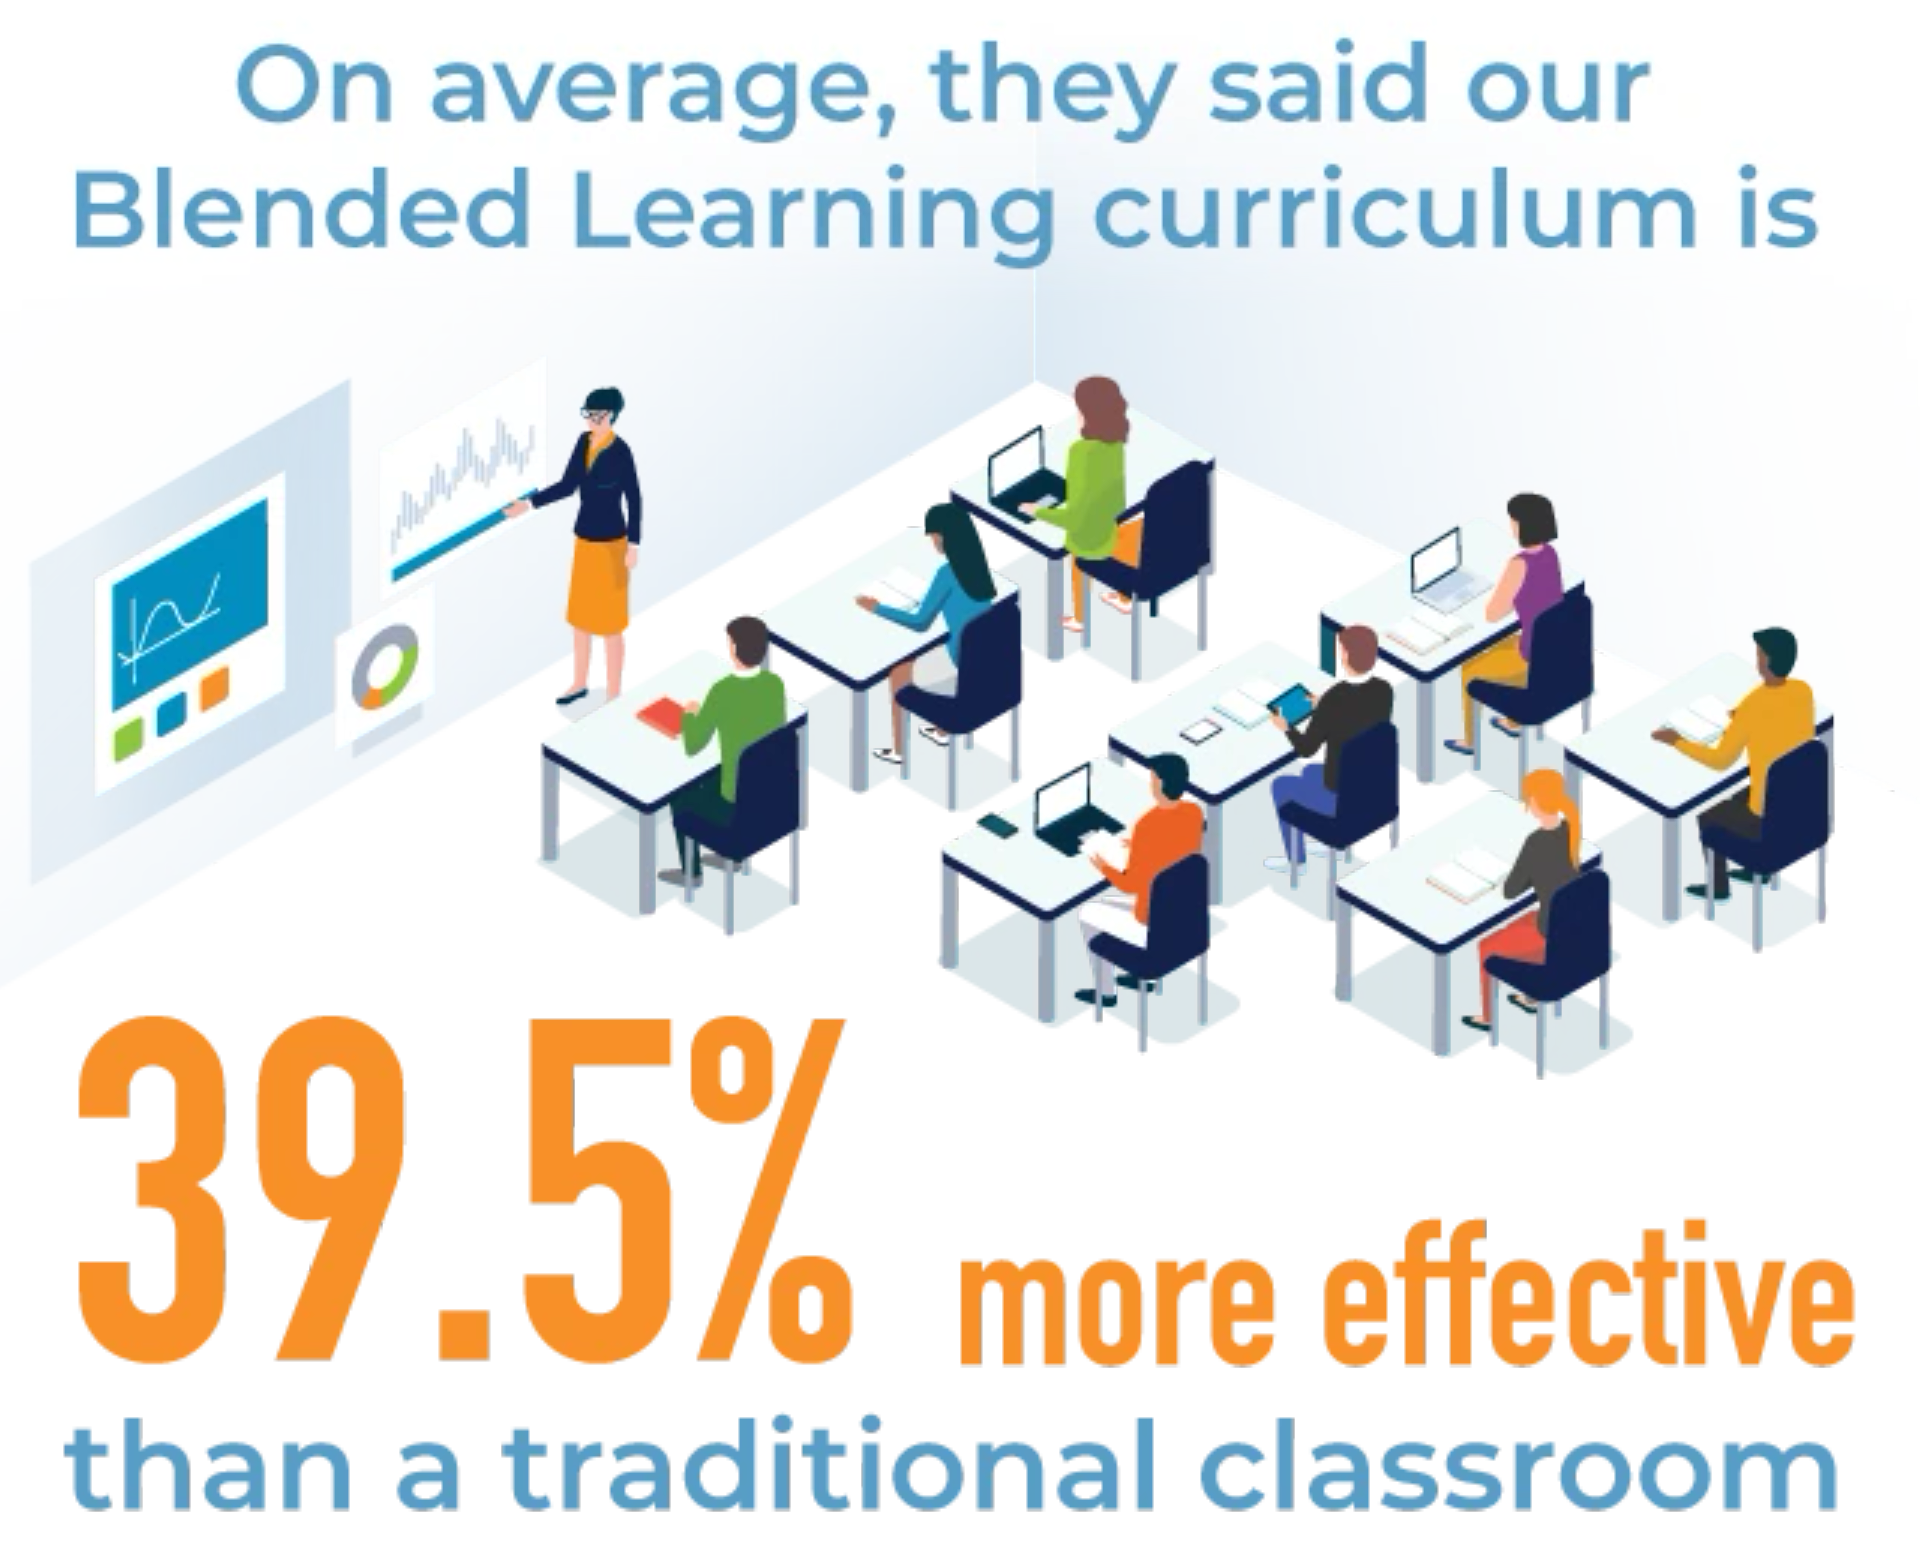 On average, blended learning is 39.5% more effective than traditional classroom training